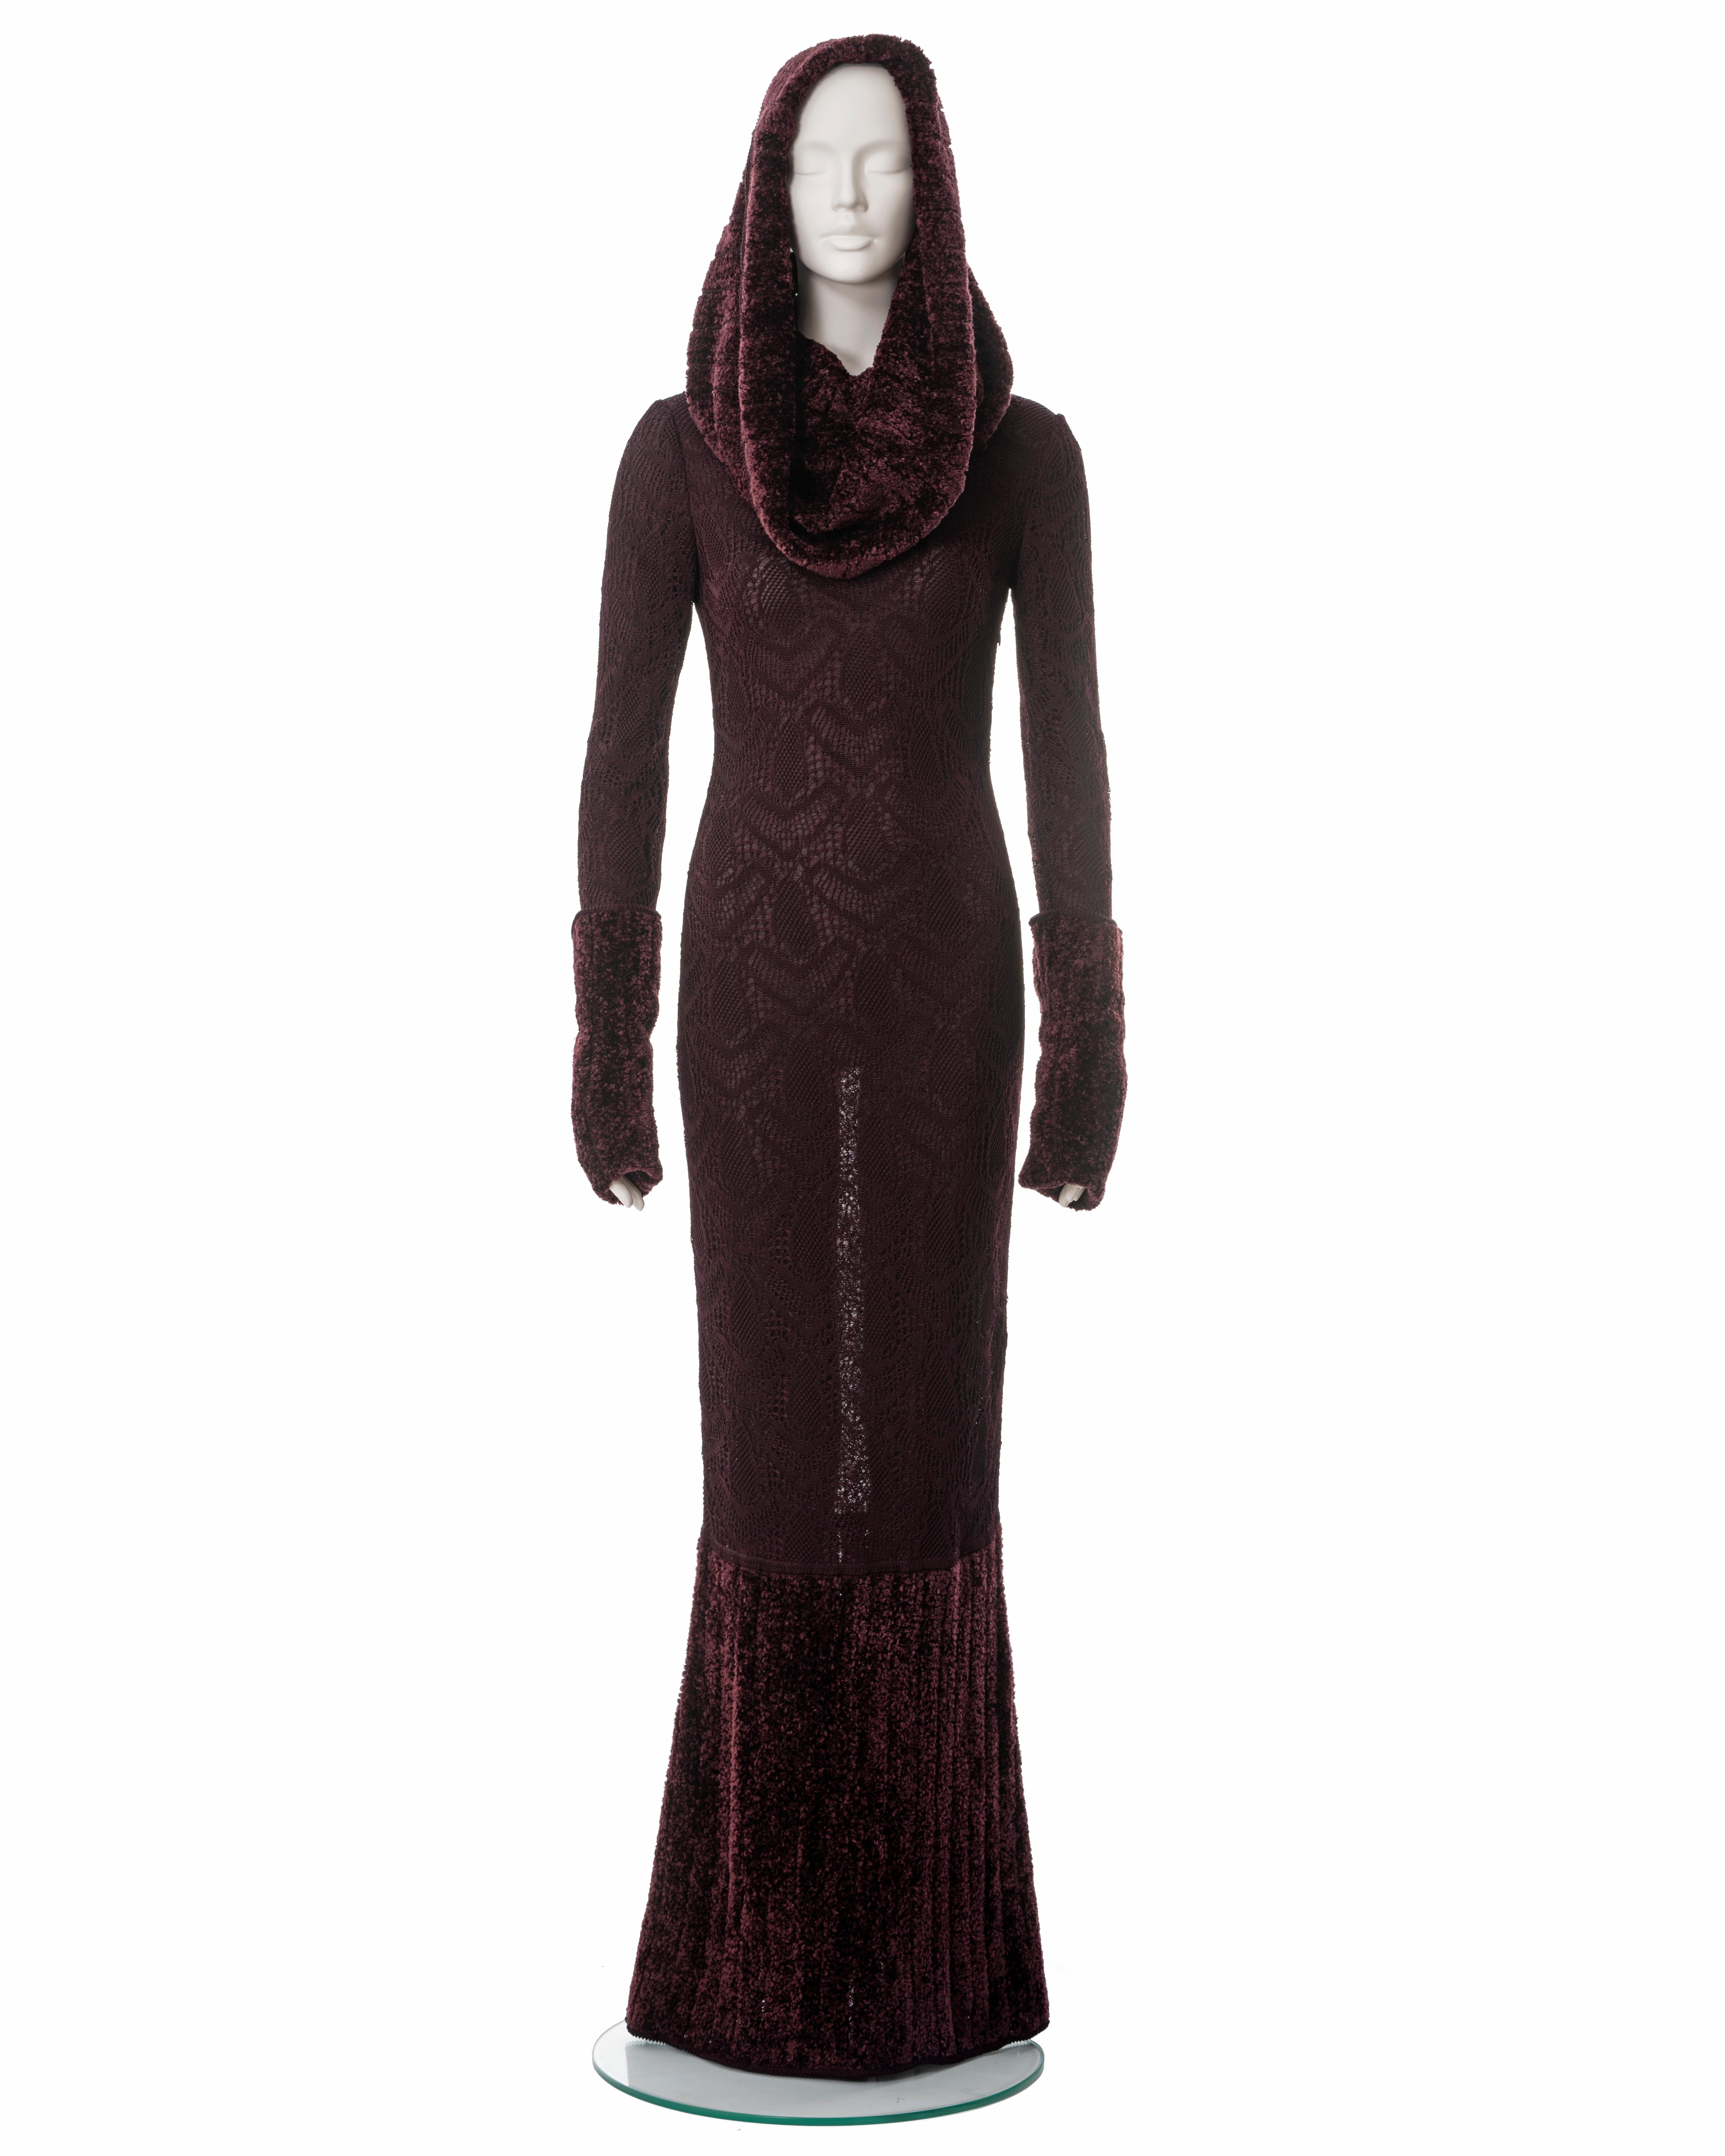 ▪ John Galliano burgundy knitted lace evening dress
▪ Sold by One of a Kind Archive
▪ Fall-Winter 1999
▪ Chenille skirt, turn-over cuffs and large off-shoulder collar which can double as a hood 
▪ Double-layered 
▪ Concealed side seam zipper 
▪ Size